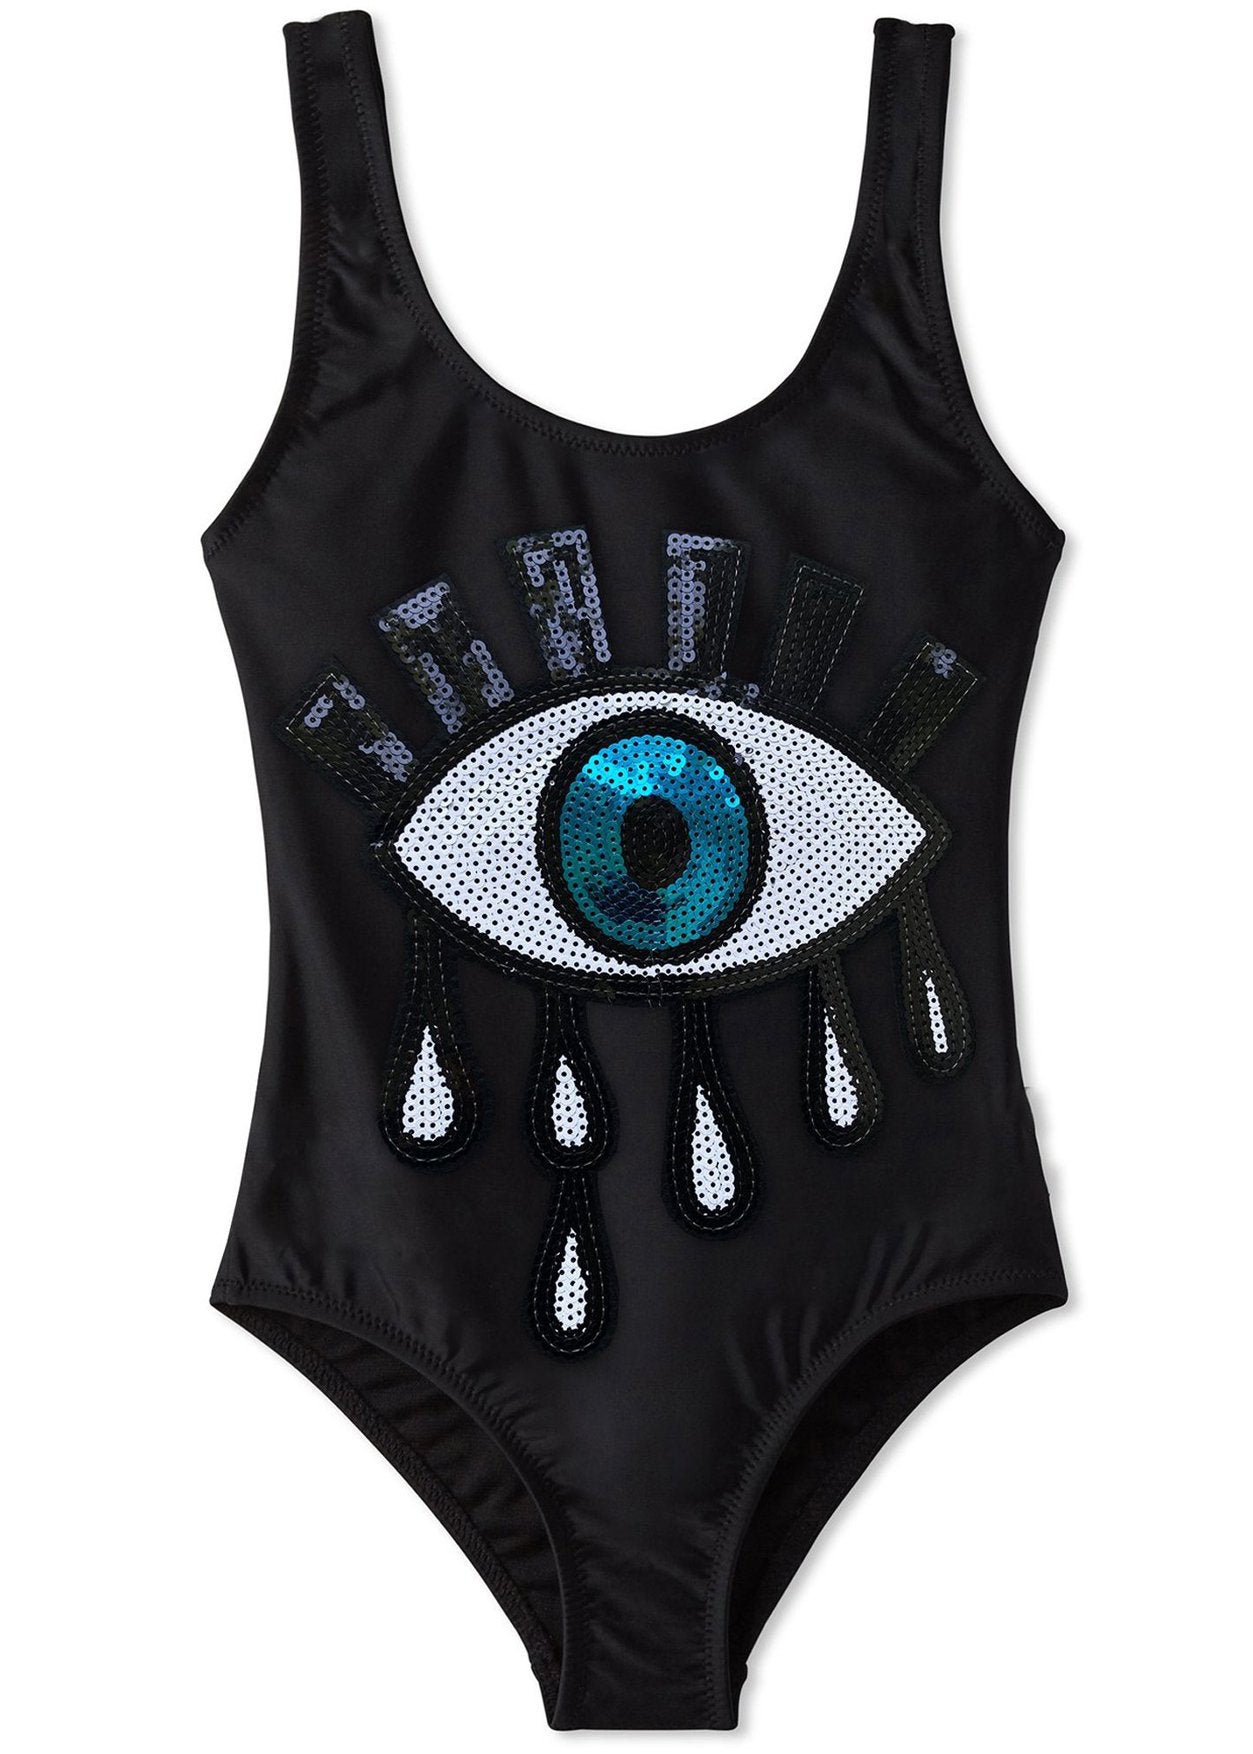 Black Tank with Sequin Eye